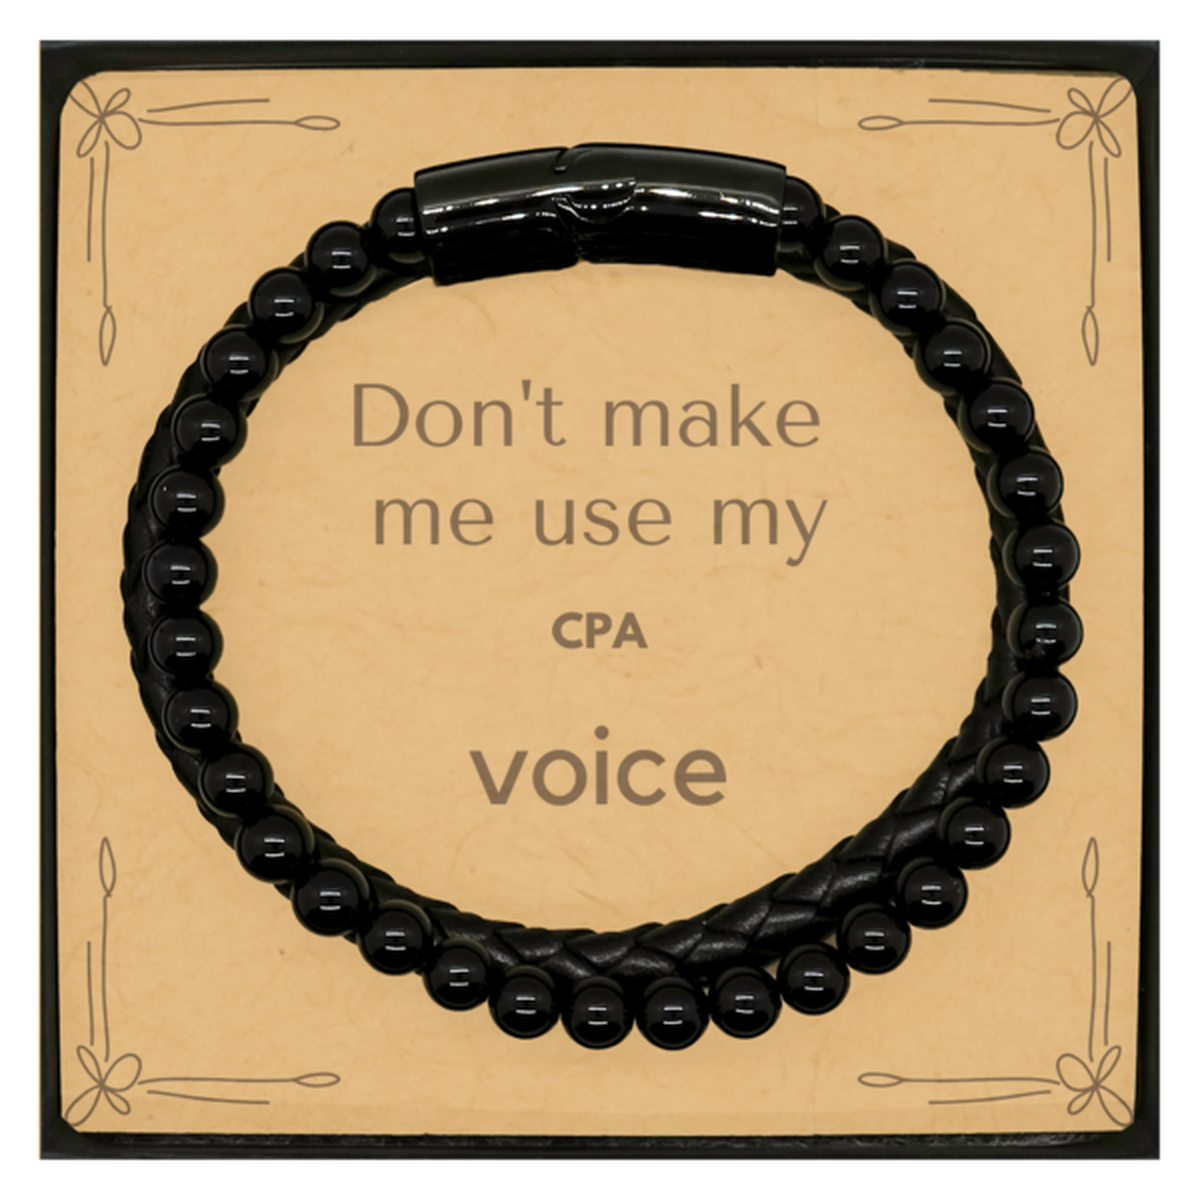 Don't make me use my CPA voice, Sarcasm CPA Card Gifts, Christmas CPA Stone Leather Bracelets Birthday Unique Gifts For CPA Coworkers, Men, Women, Colleague, Friends